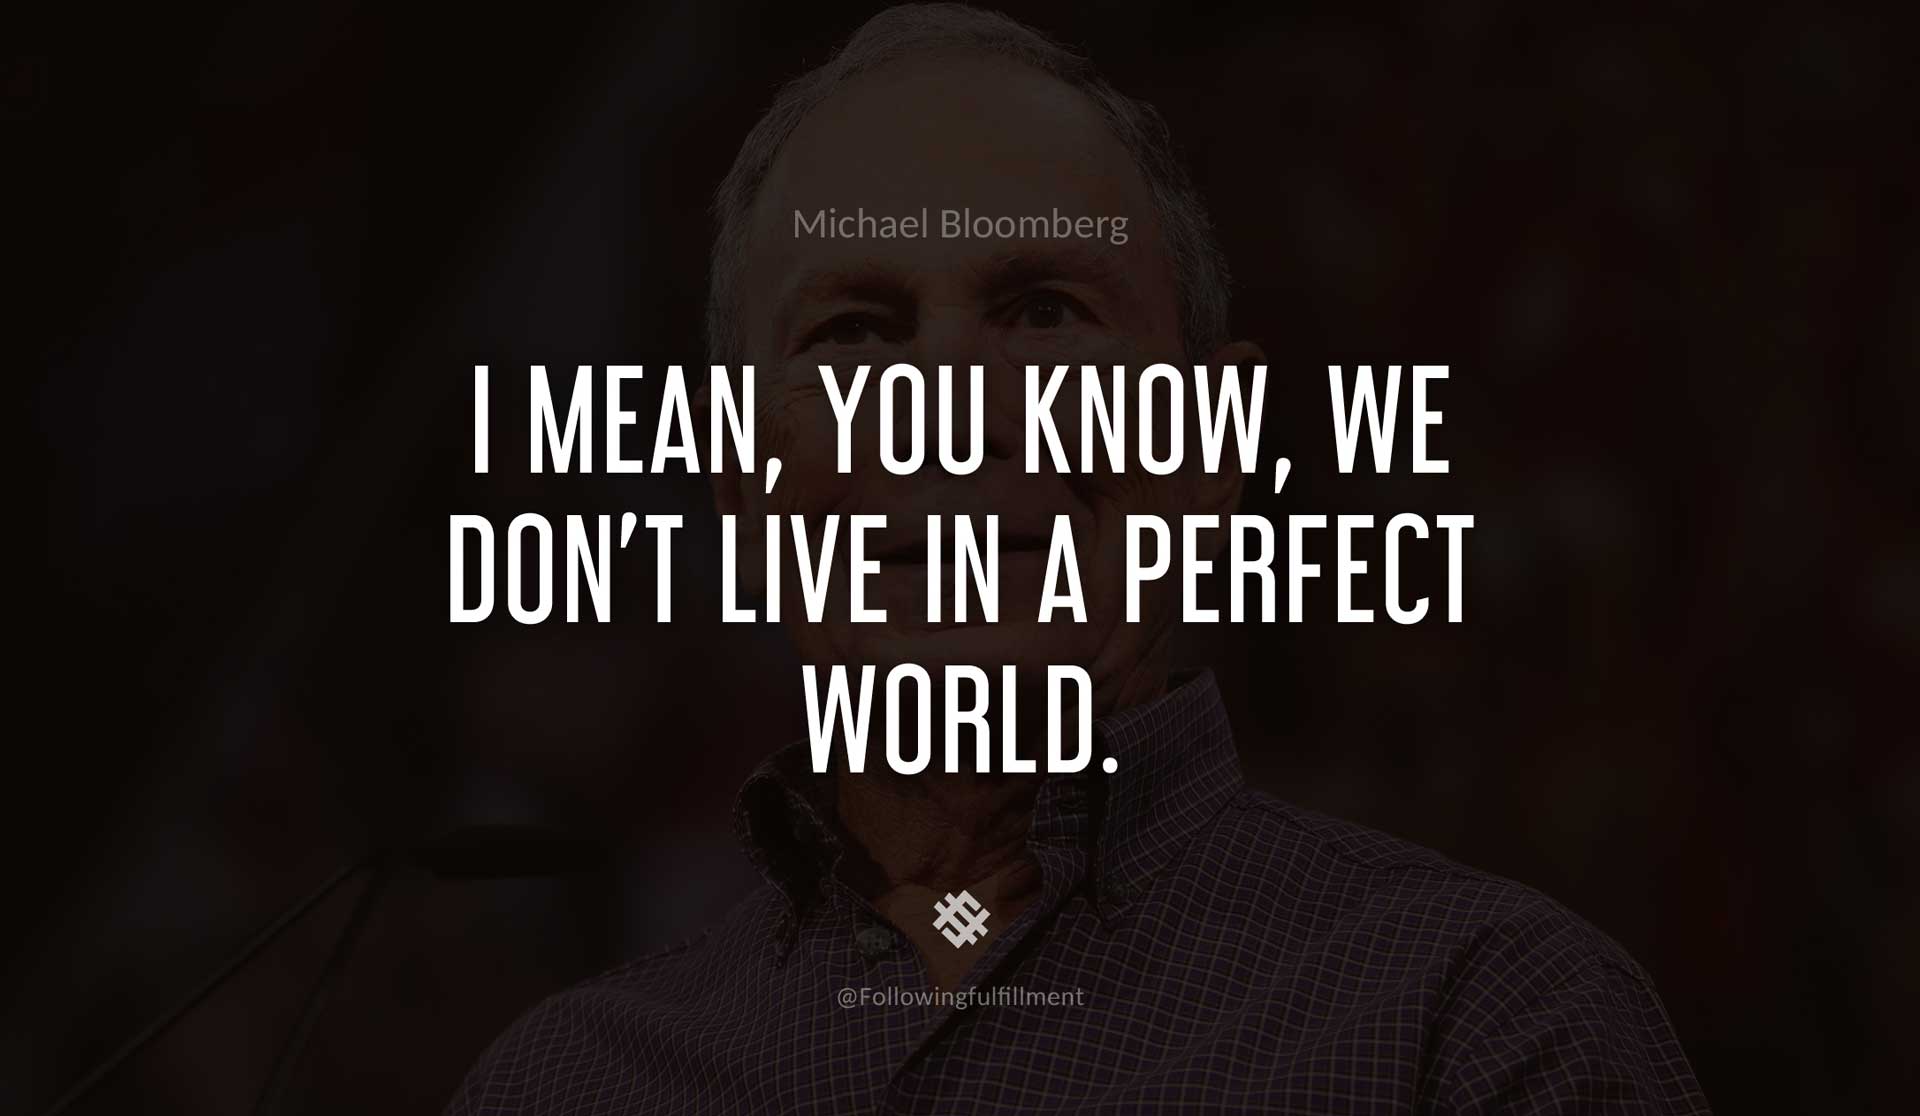 I-mean,-you-know,-we-don't-live-in-a-perfect-world.-MICHAEL-BLOOMBERG-Quote.jpg